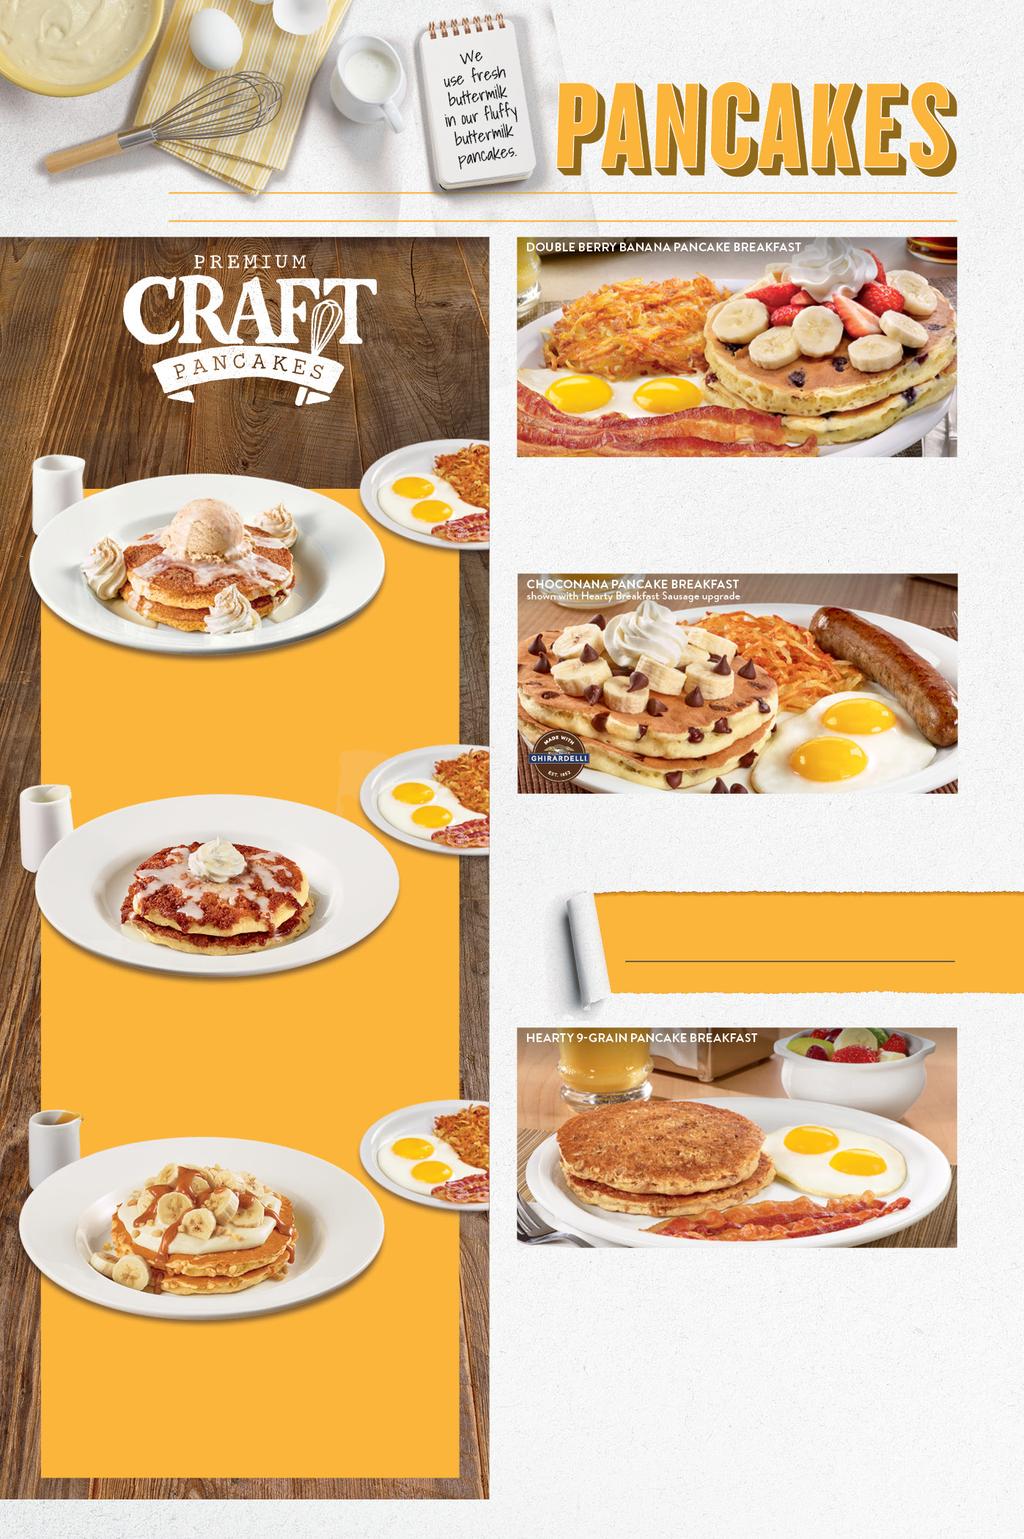 All PANCAKE BREAKFASTS are served with two eggs* and hash browns, plus your choice of two bacon strips or two sausage links. Hand-crafted pancakes are made to order using premium ingredients. New!